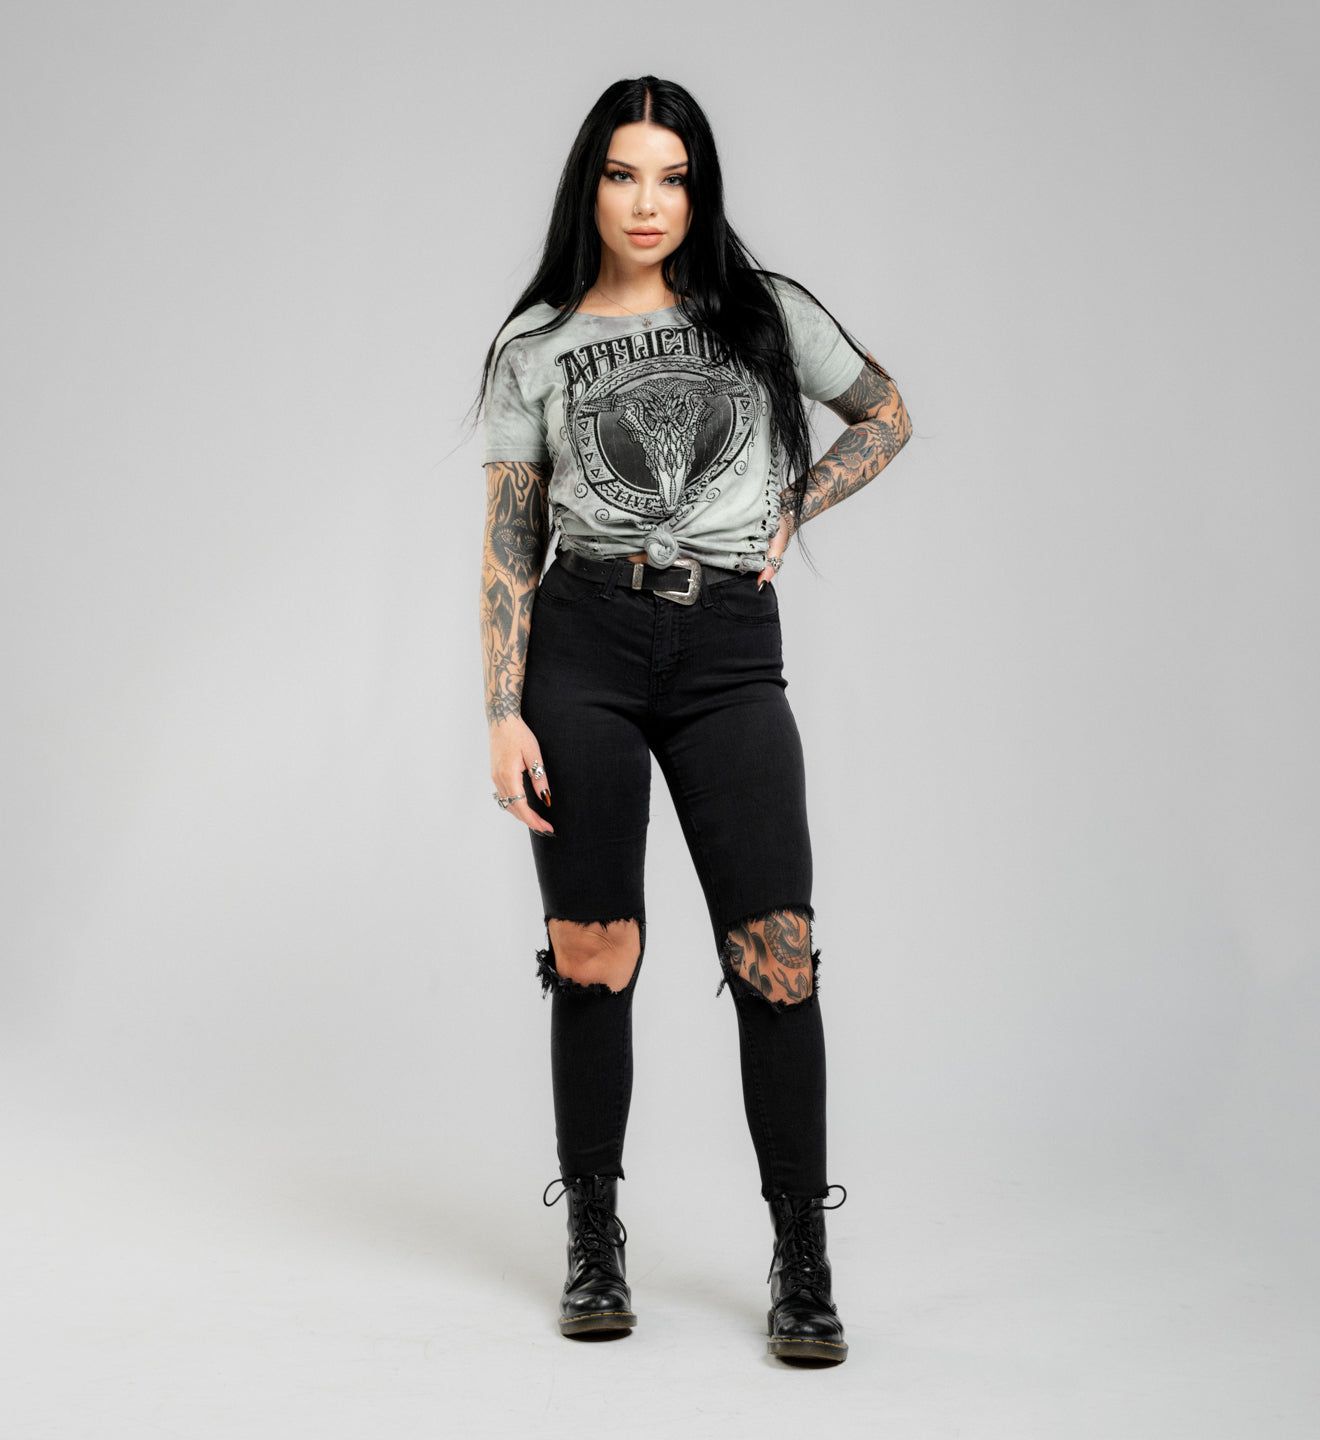 Roam Unknown - Affliction Clothing